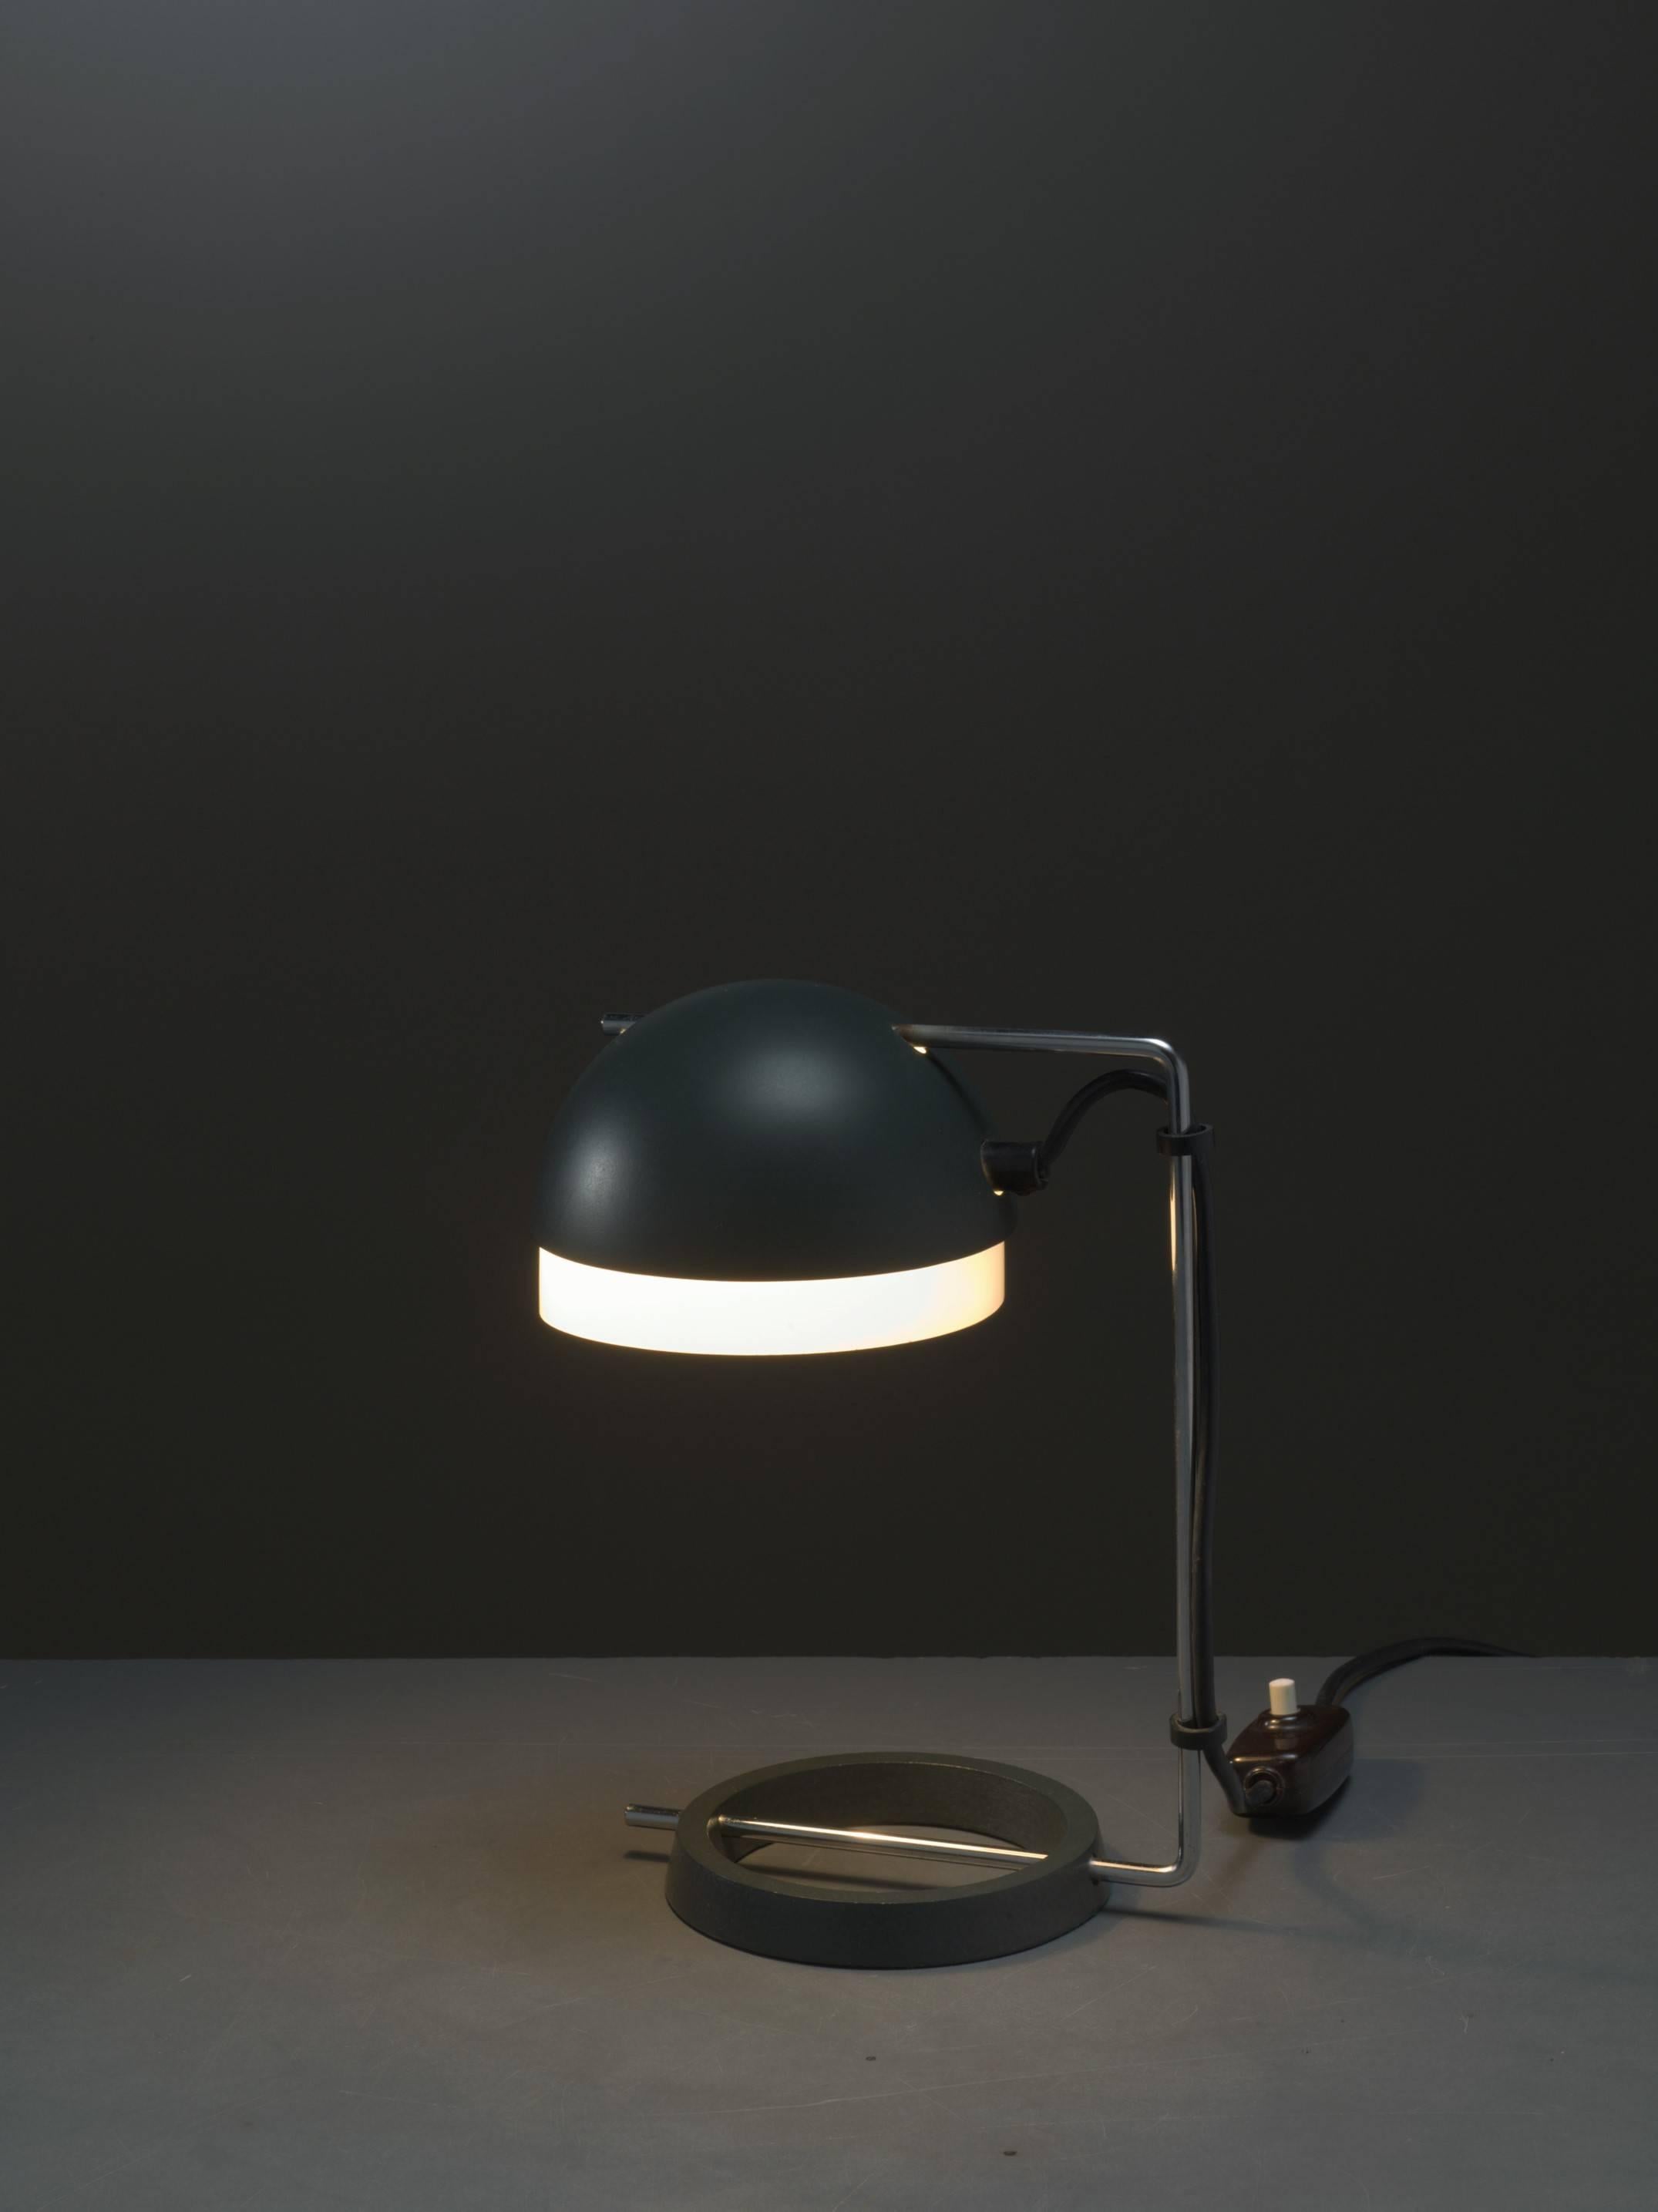 A rare, adjustable desk lamp by Swiss designers Rosemarie and Rico Baltensweiler.
The lampshade is made of dark green metal, with a white plastic inlay, held by a chrome bar in a U-shape. The foot ring is made of solid dark green metal.
Both the